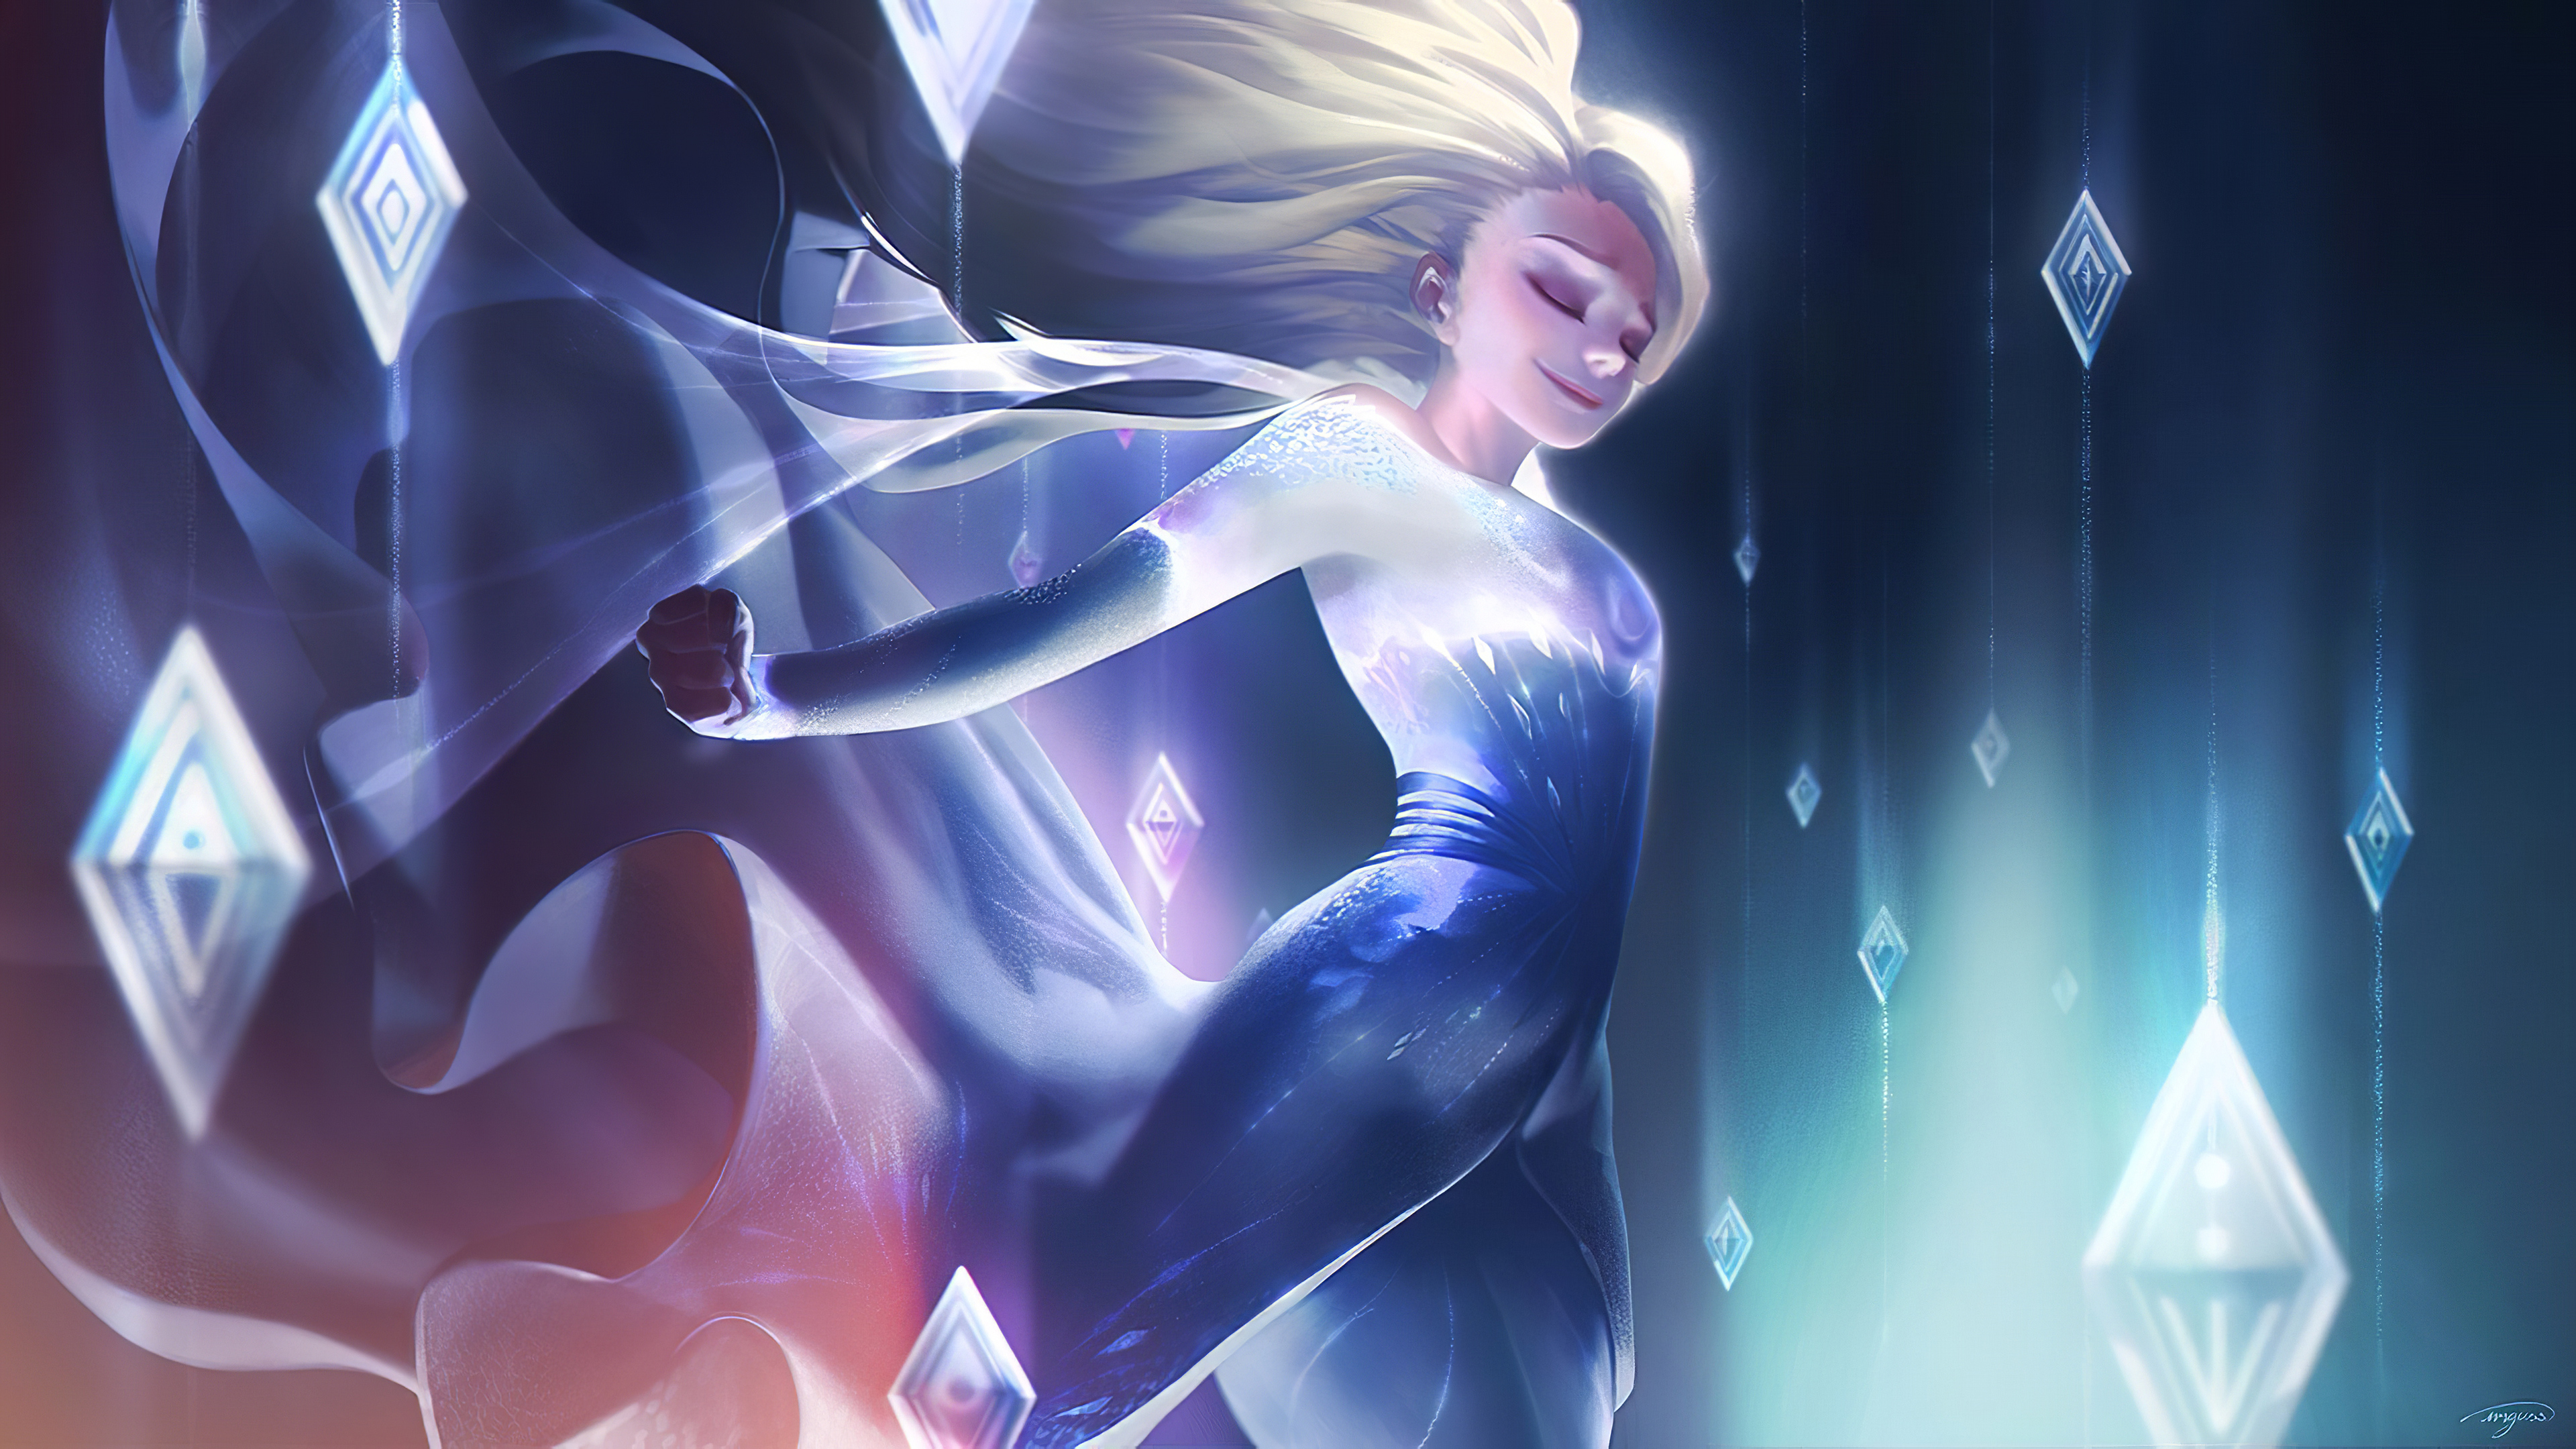 300+ Elsa (Frozen) HD Wallpapers and Backgrounds